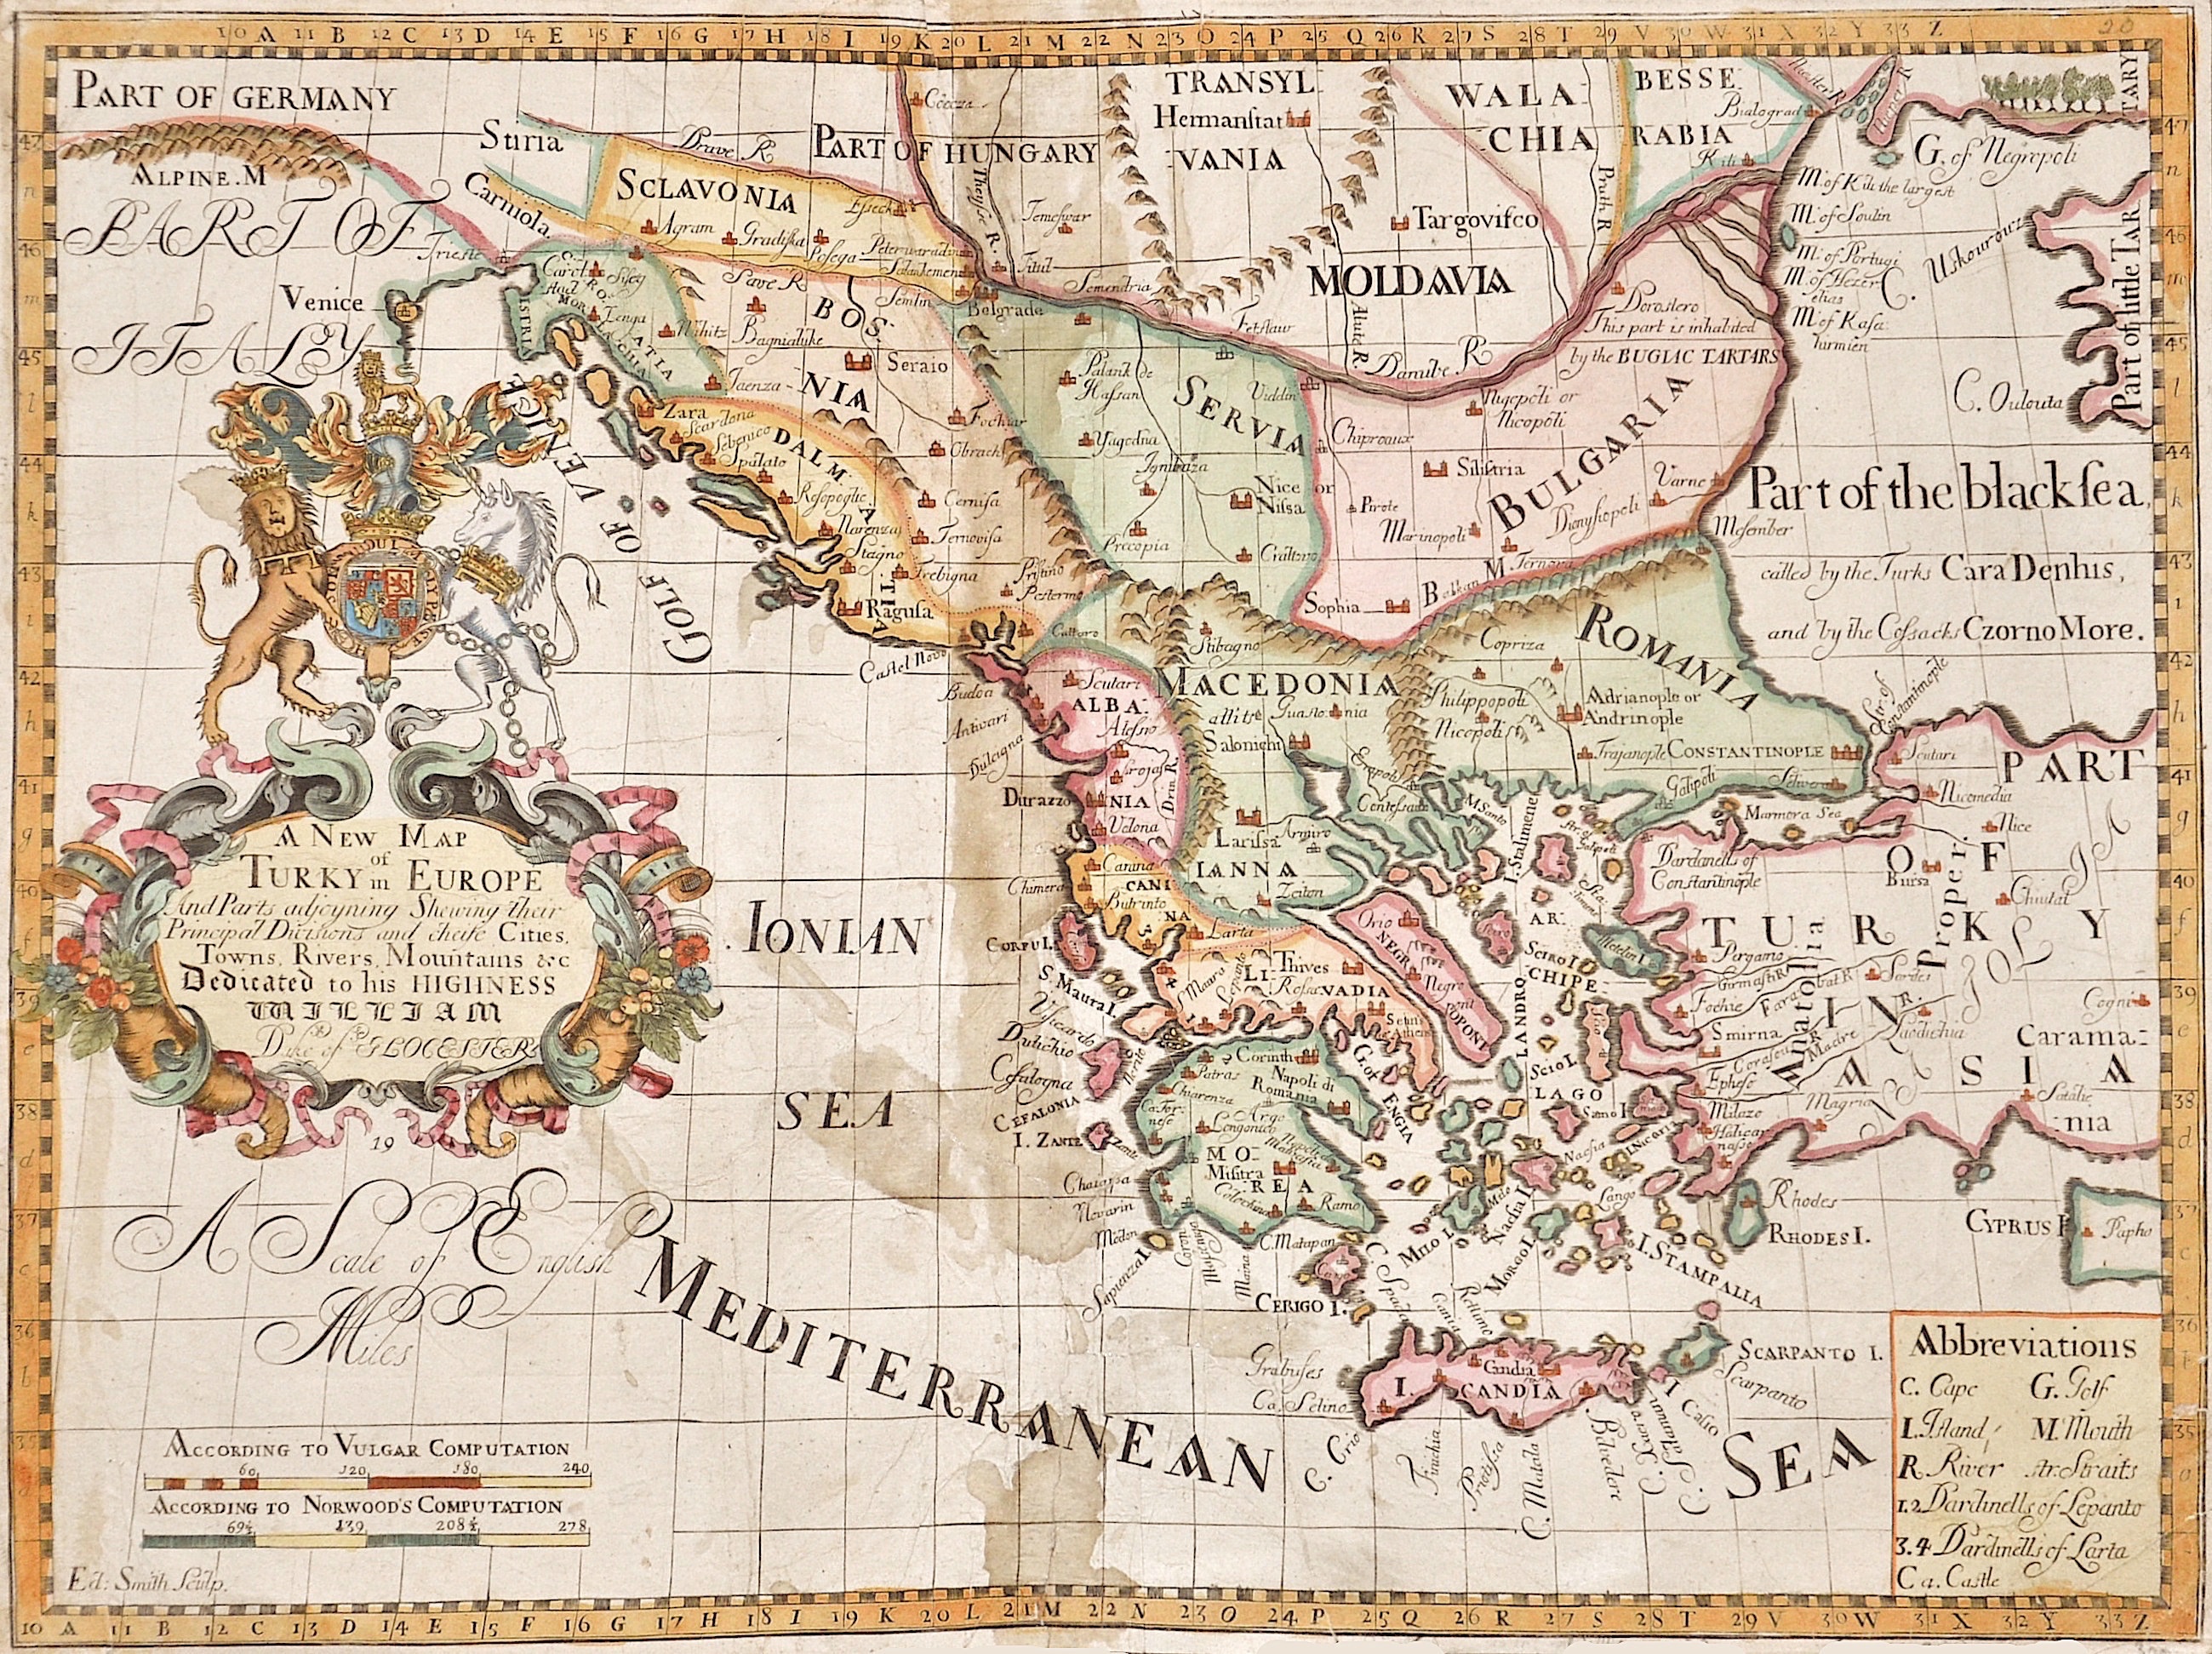 Wells Edward A New Map of Antient Greece, Thrace, Moesia, Illyricum, and the Isles adjoyning …